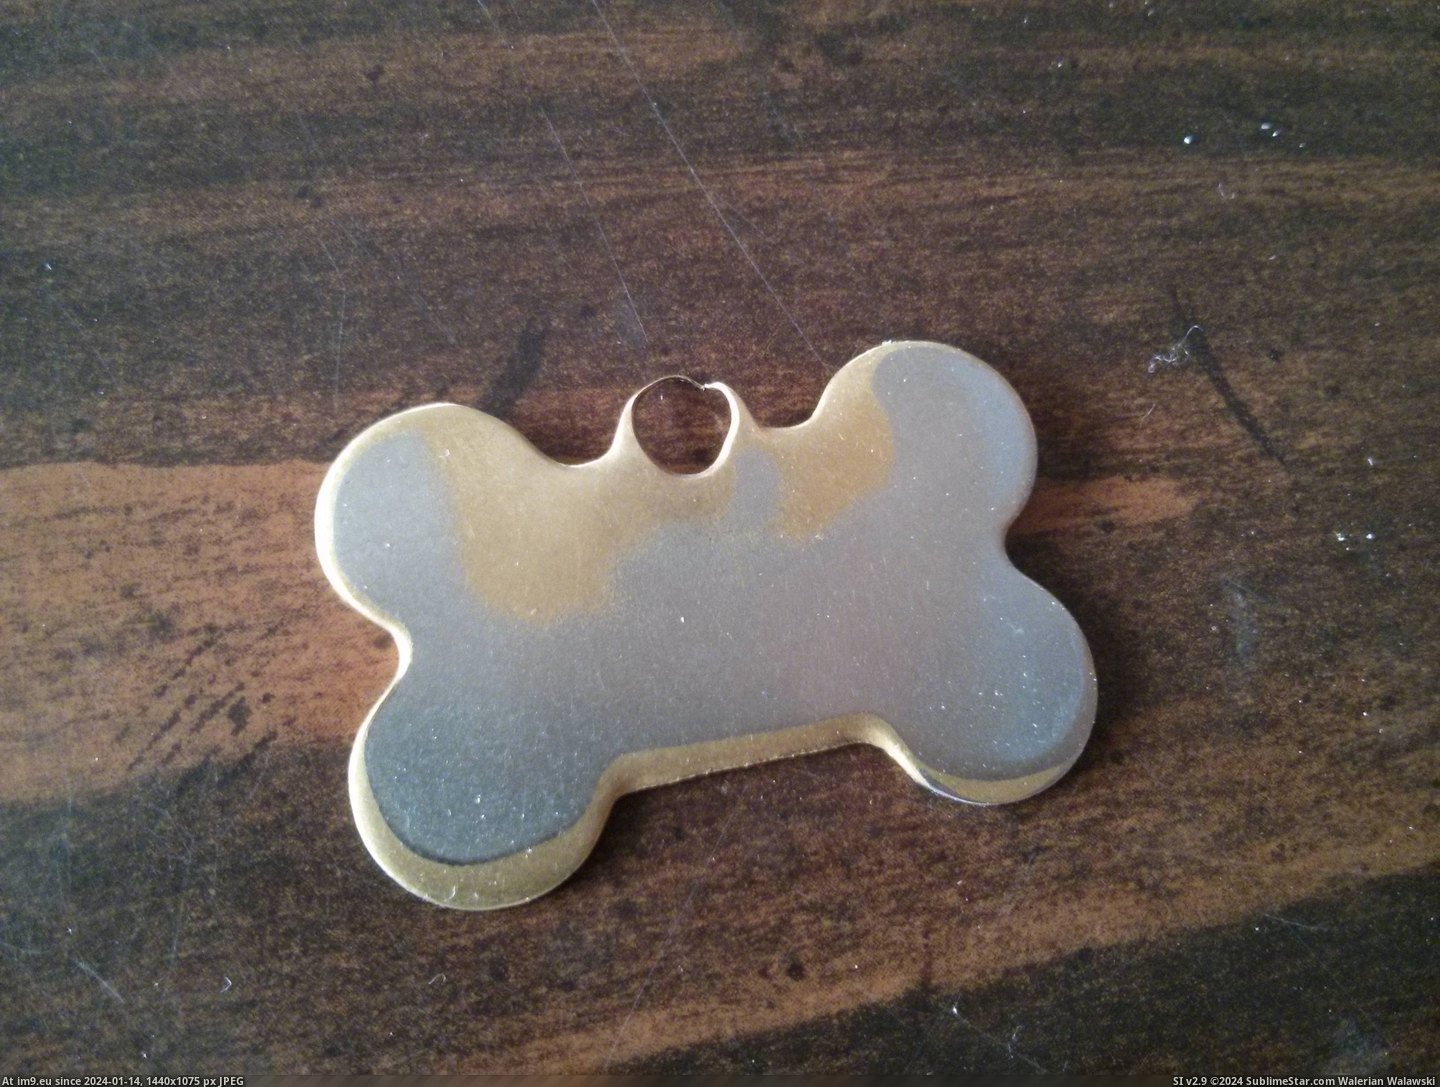 #Years #Out #Tag #Dog #Wore [Mildlyinteresting] My dog's dog tag wore out after 12 years Pic. (Bild von album My r/MILDLYINTERESTING favs))